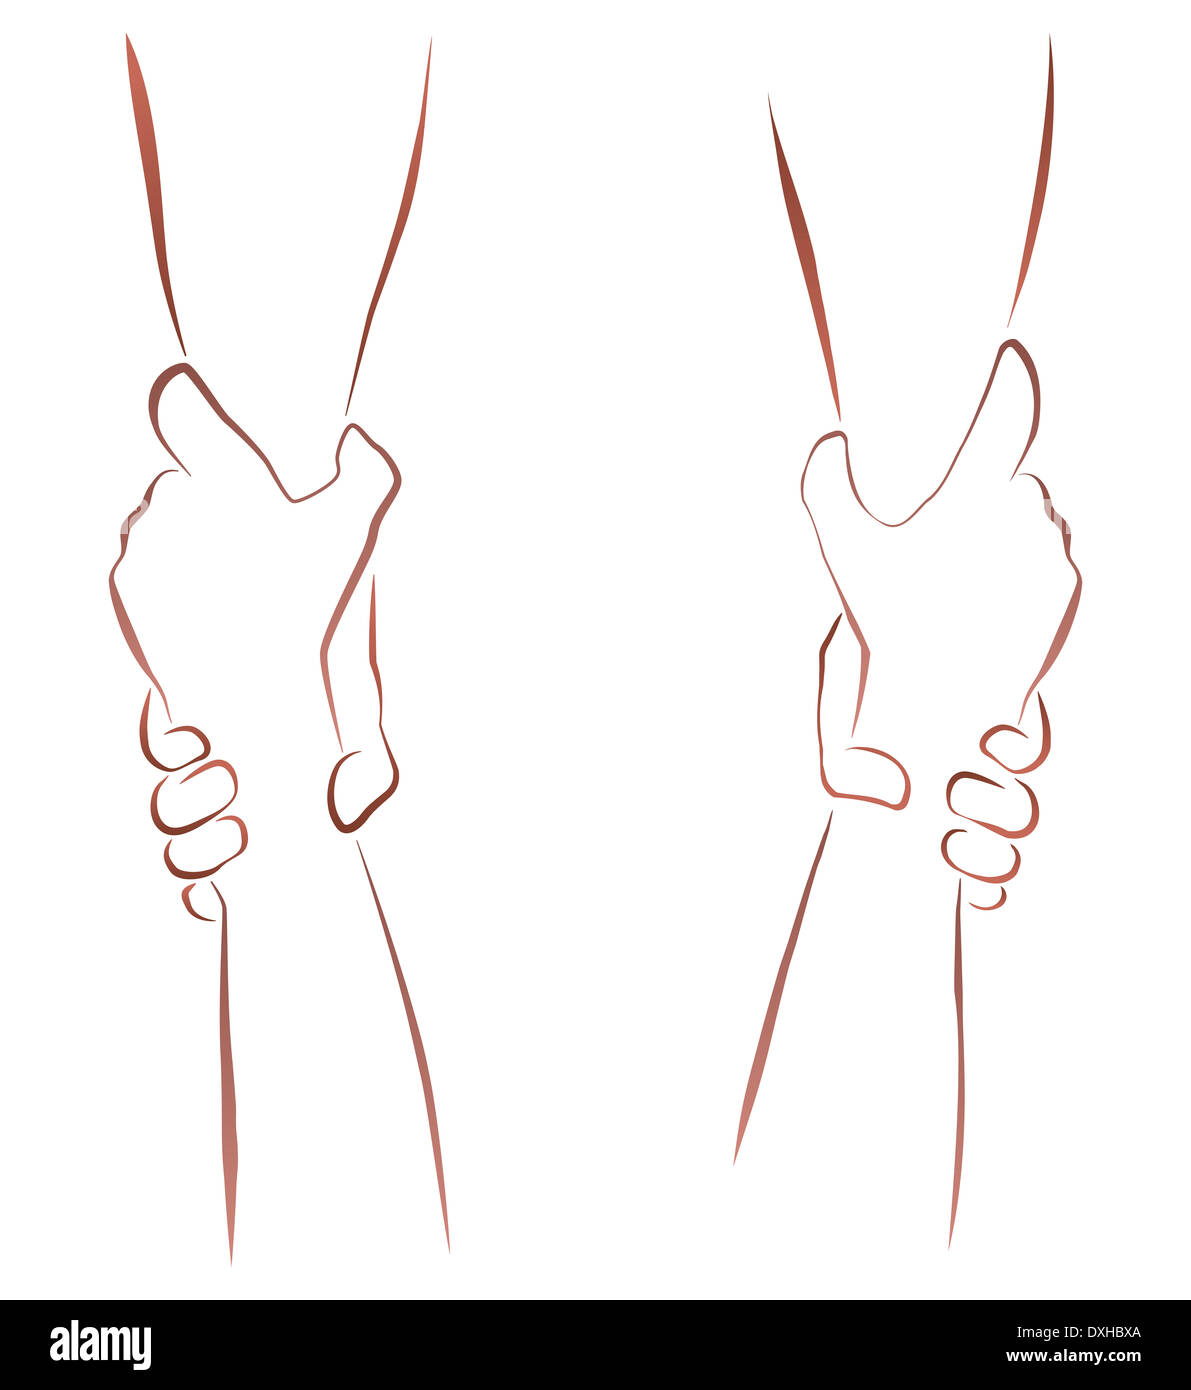 Outline illustration of a pair of forearms in a rescuing grip. Stock Photo